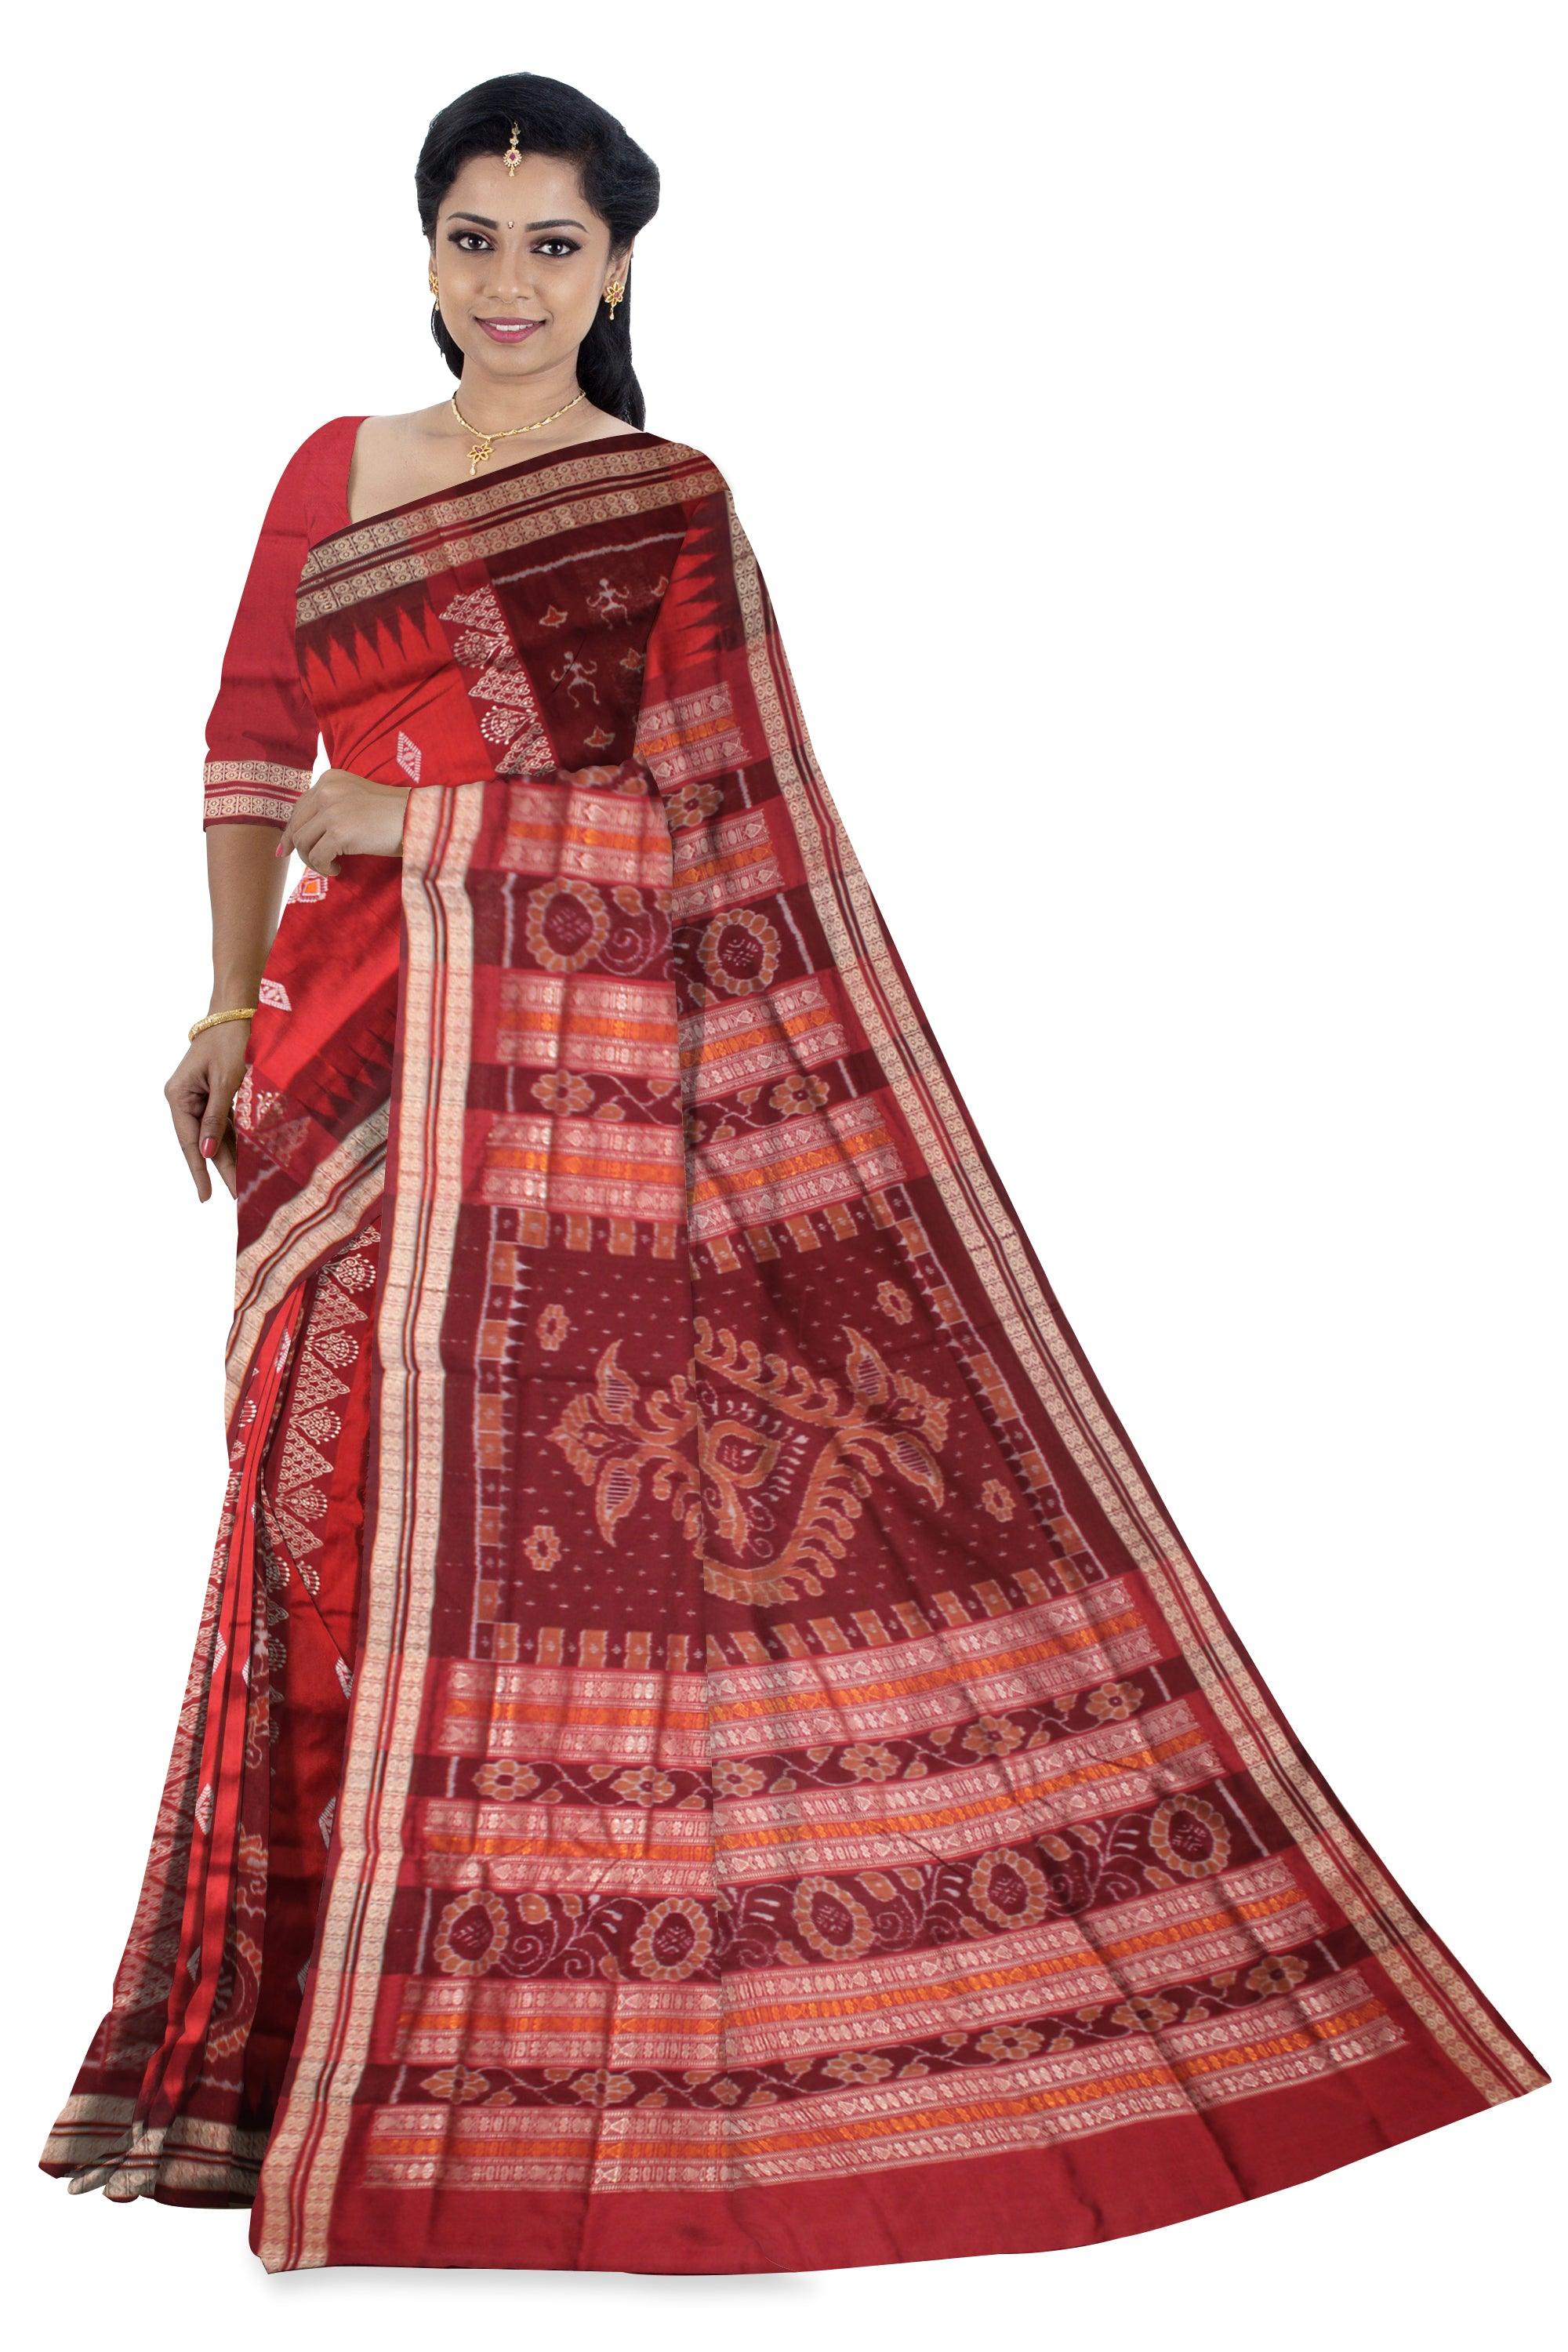 RED AND MAROON COLOR SONEPUR BOMKEI PATA SAREE , WITH BLOUSE PIECE. - Koshali Arts & Crafts Enterprise